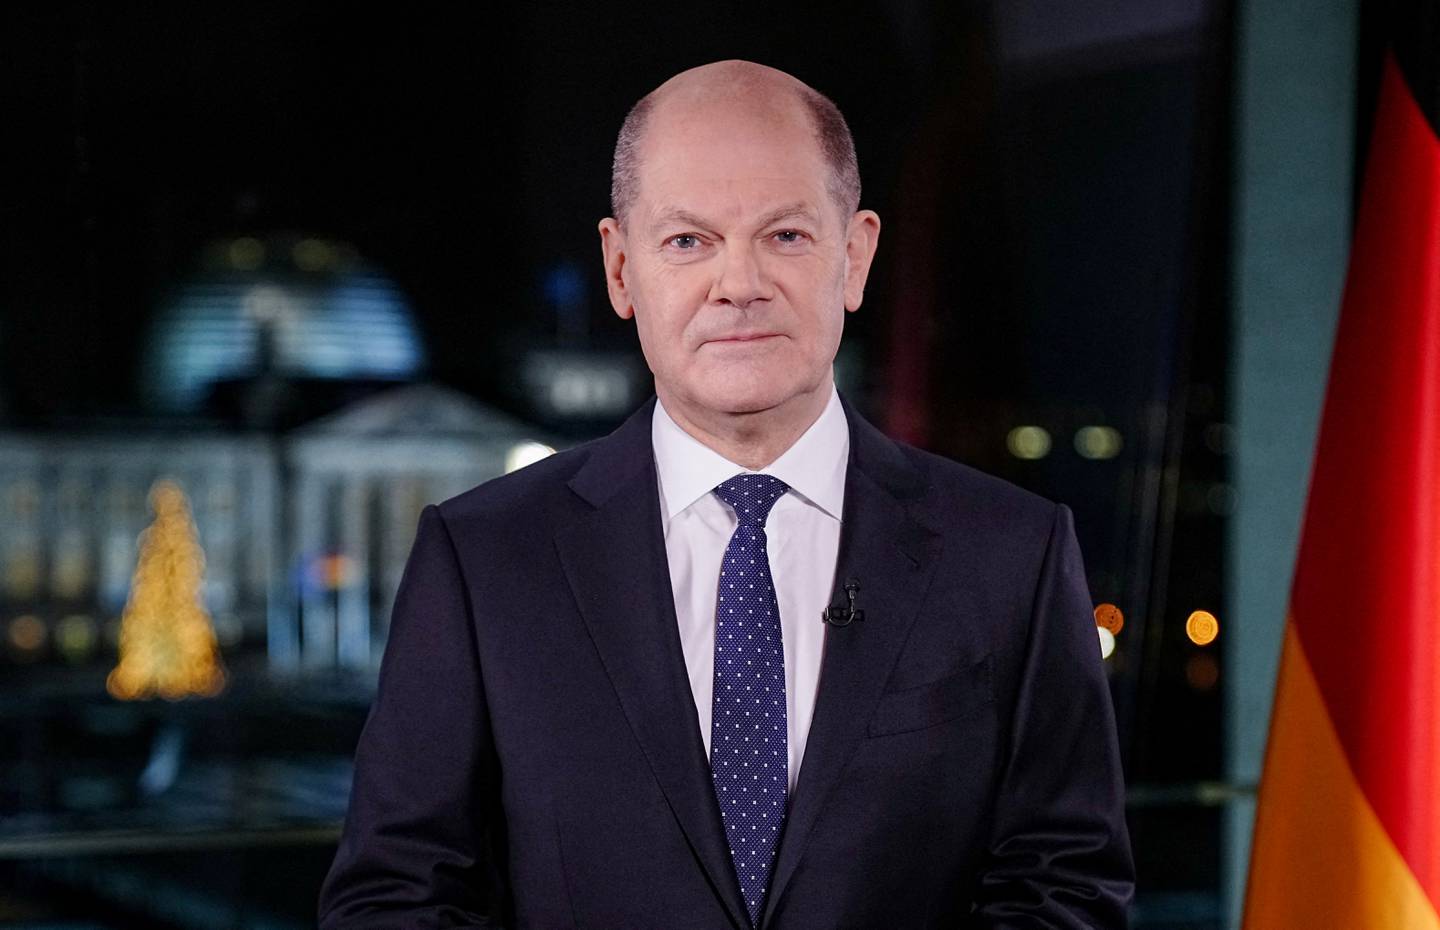 German Chancellor Olaf Scholz gave his first New Year's Eve address since taking office. Reuters